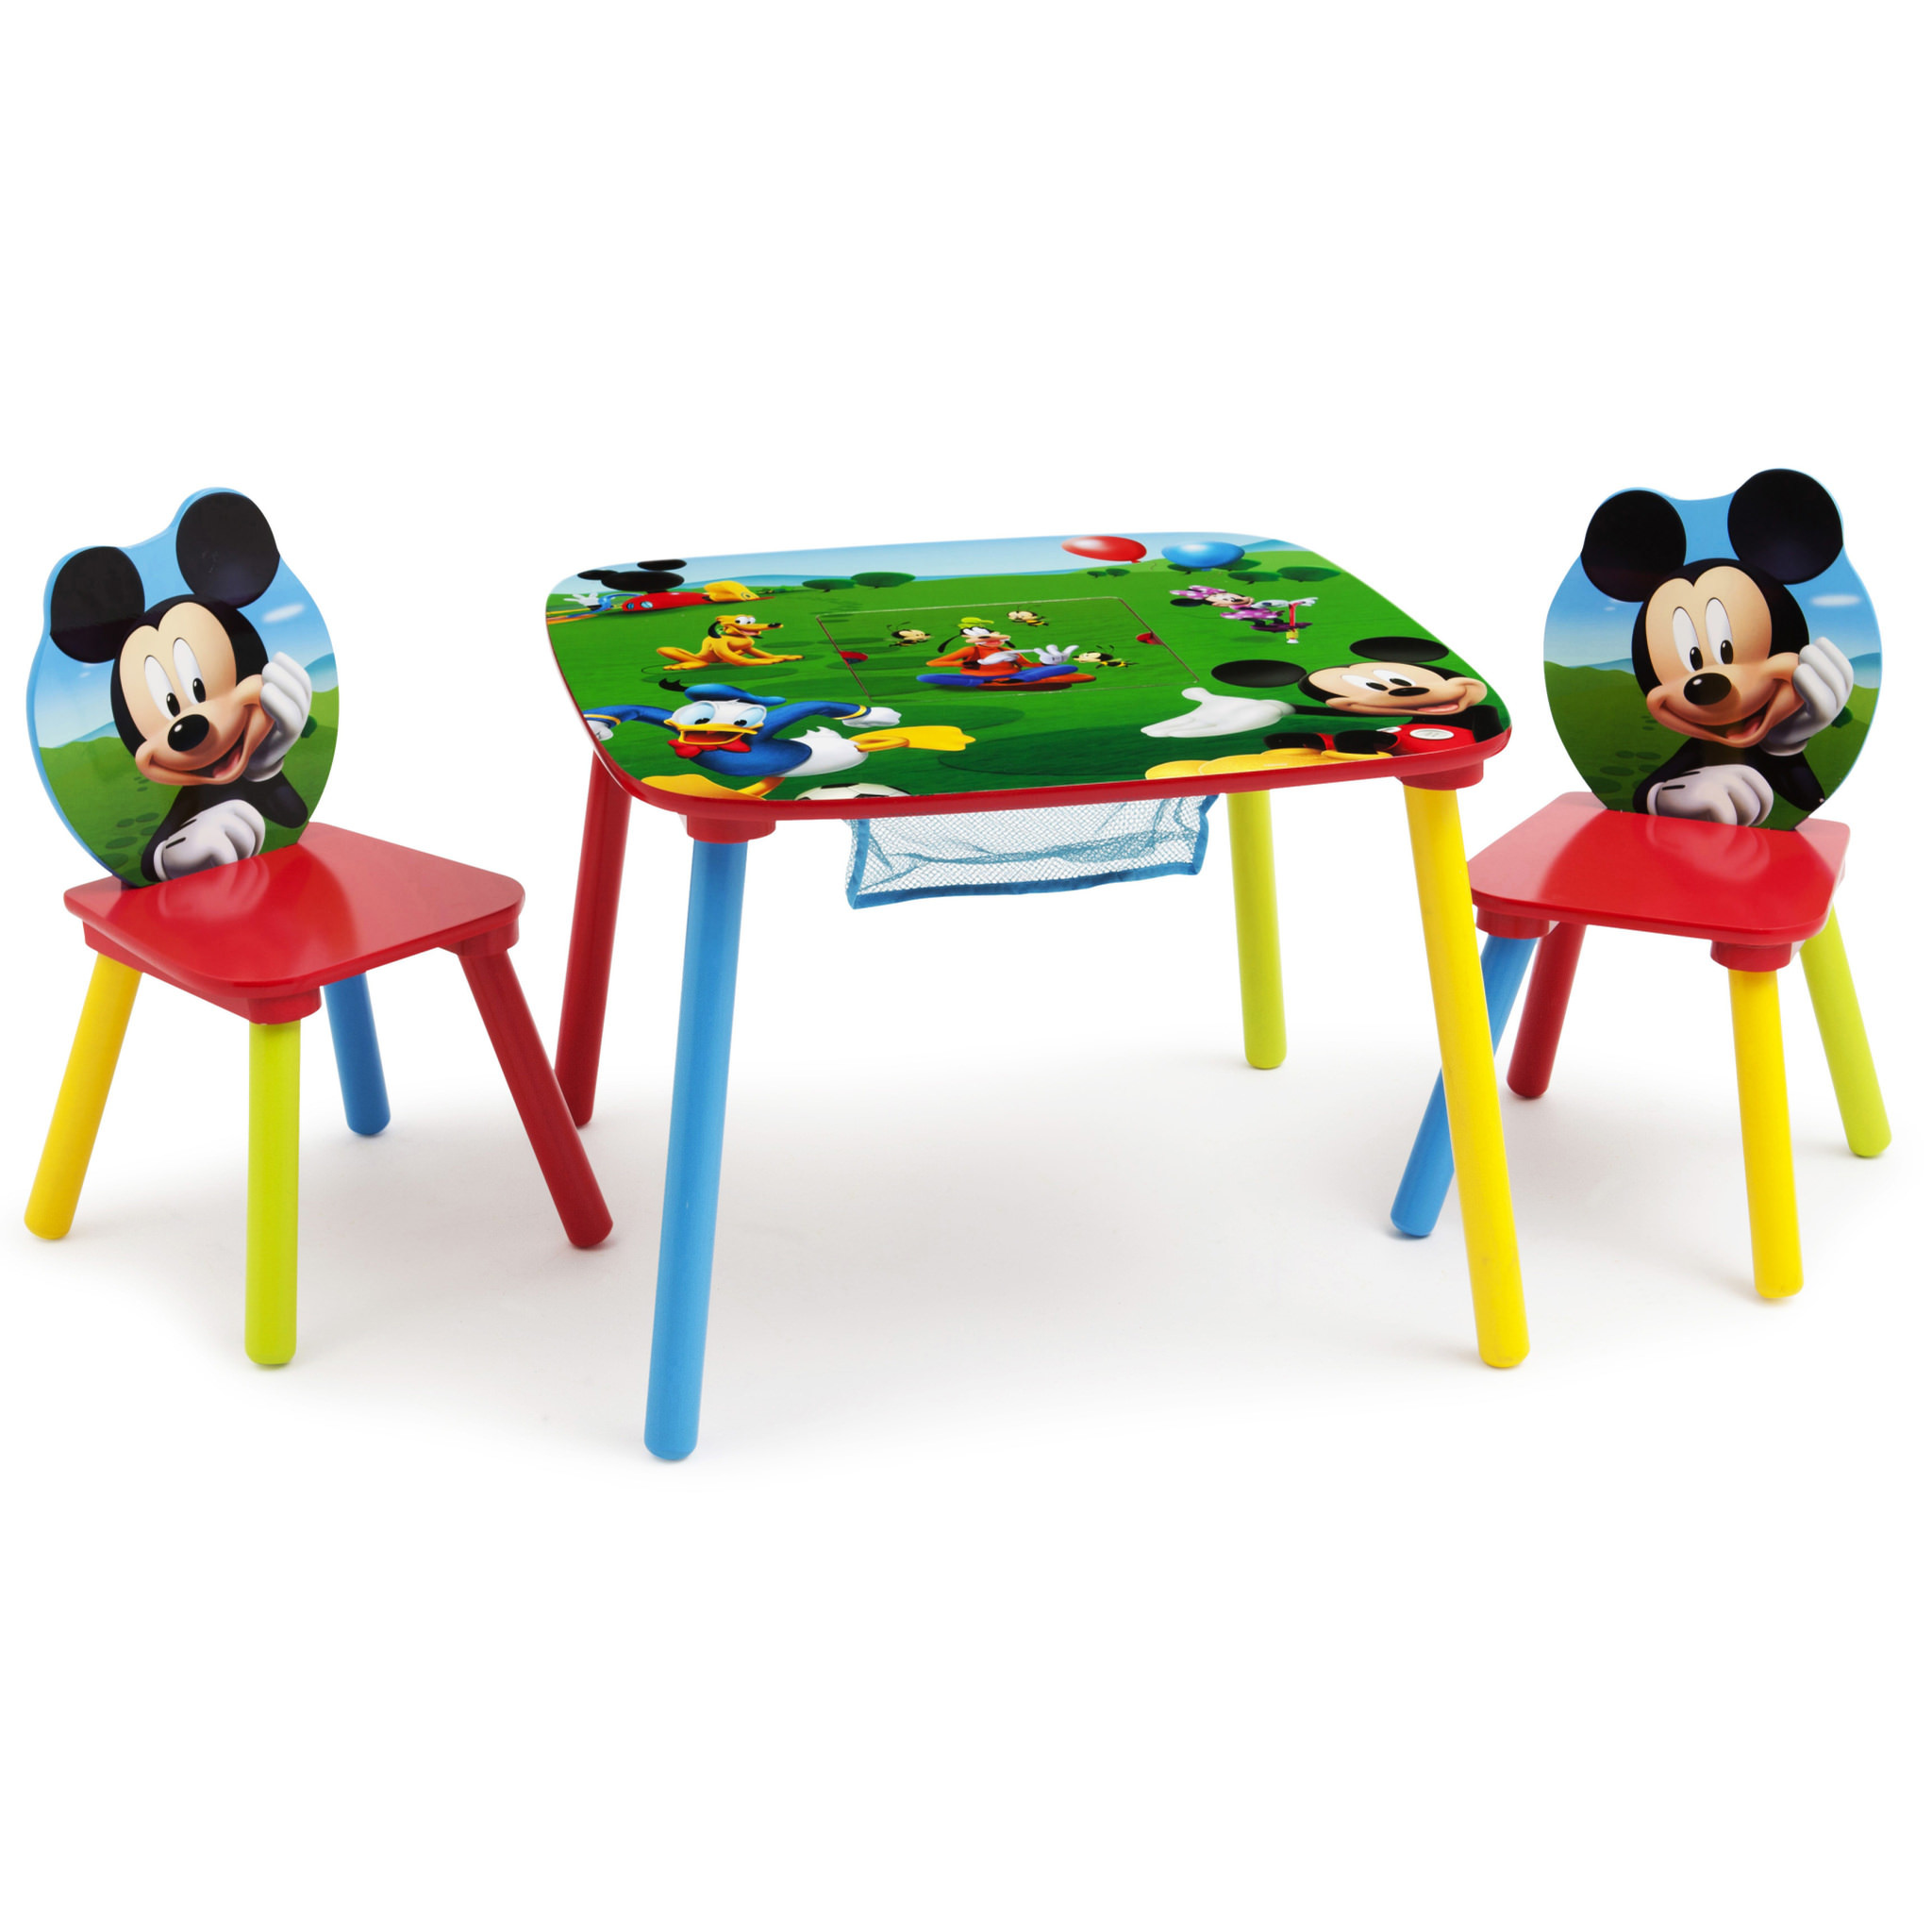 Kids Table And Chairs Walmart
 nonConfig Walmart